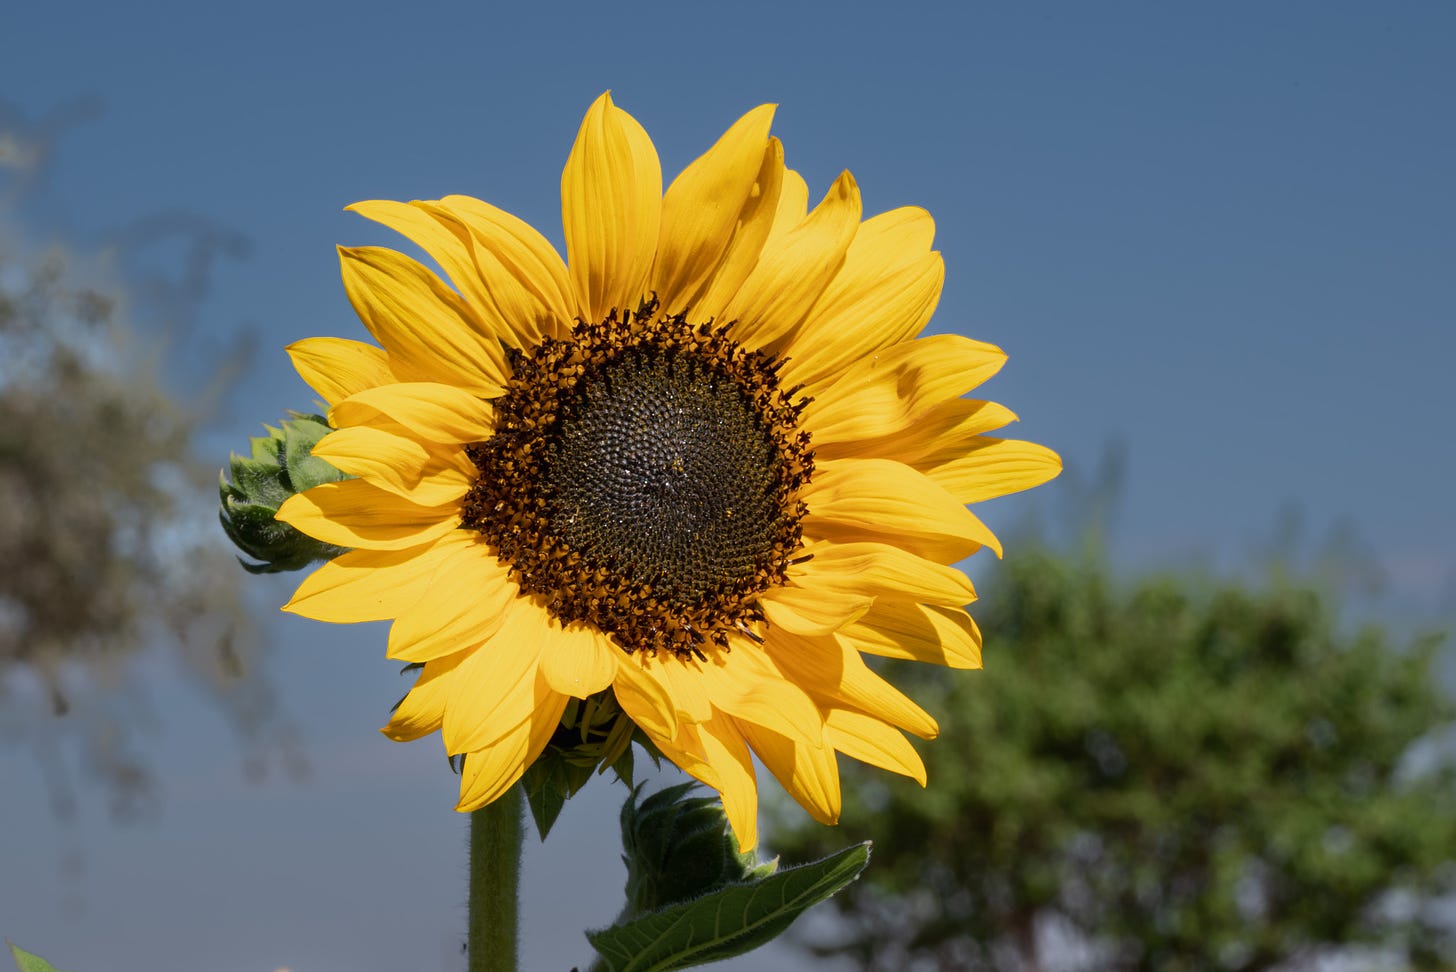 A single yellow sunflower with a dark center against a blue sky with trees blurred in the background on the left and right